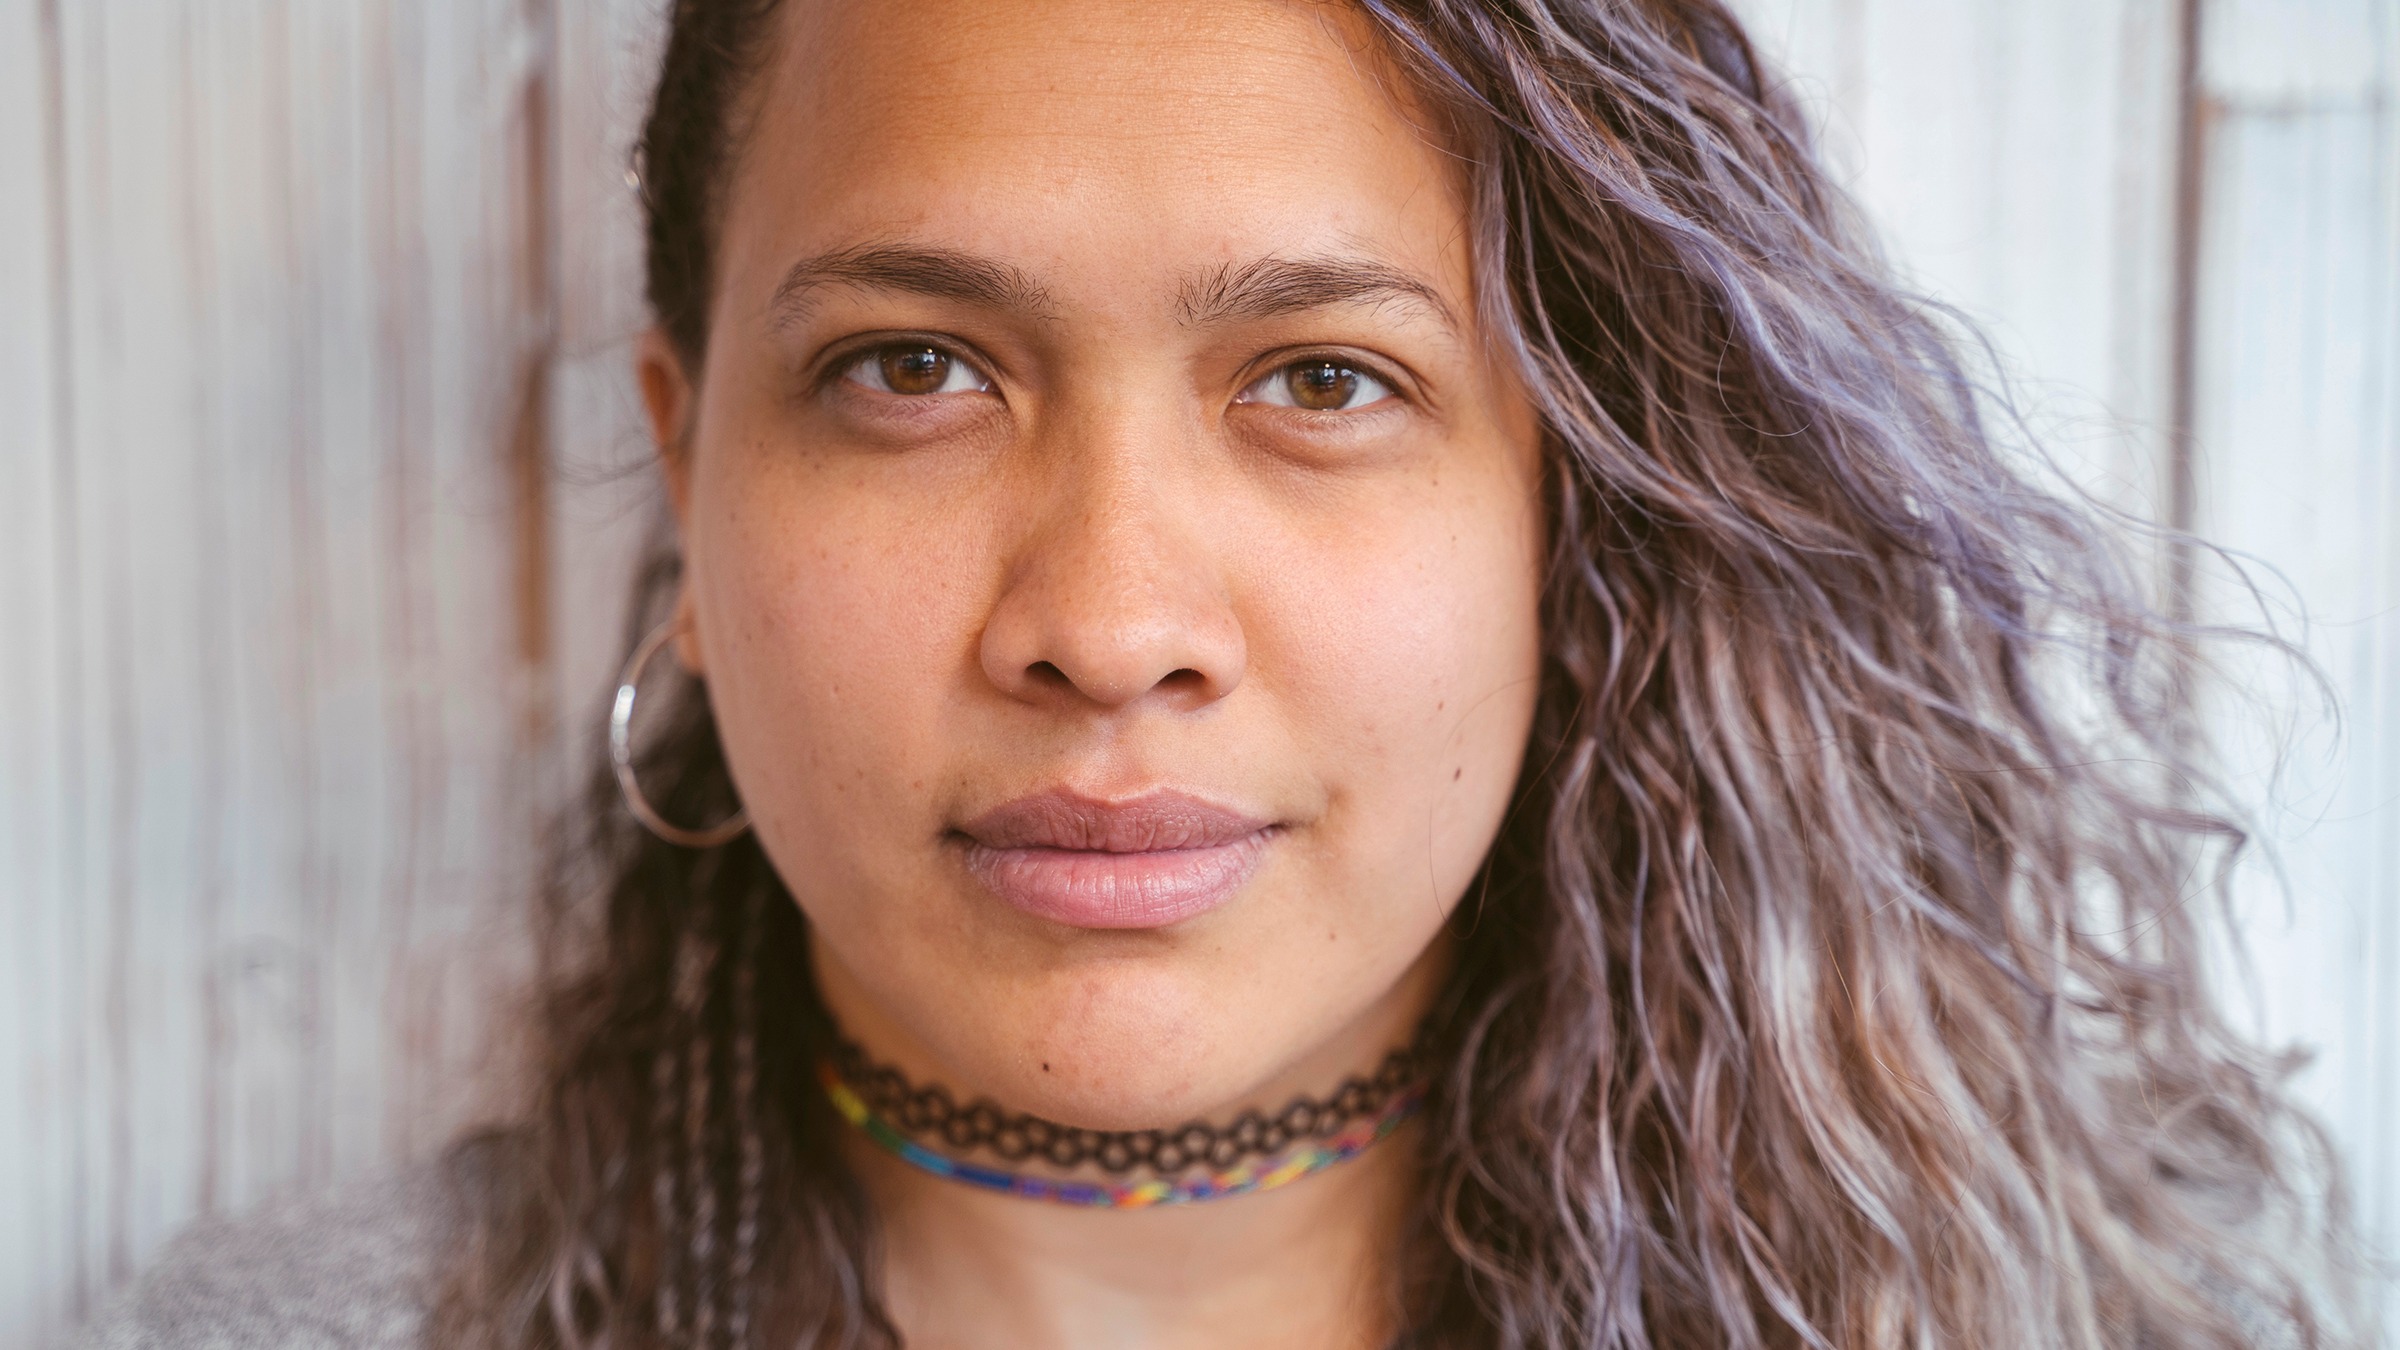 Close-up portrait of a young woman with curly purple gray-ish hair. She is wearing a black choker necklace and has a slight smile on her face.
Beavera/iStock via Getty Images